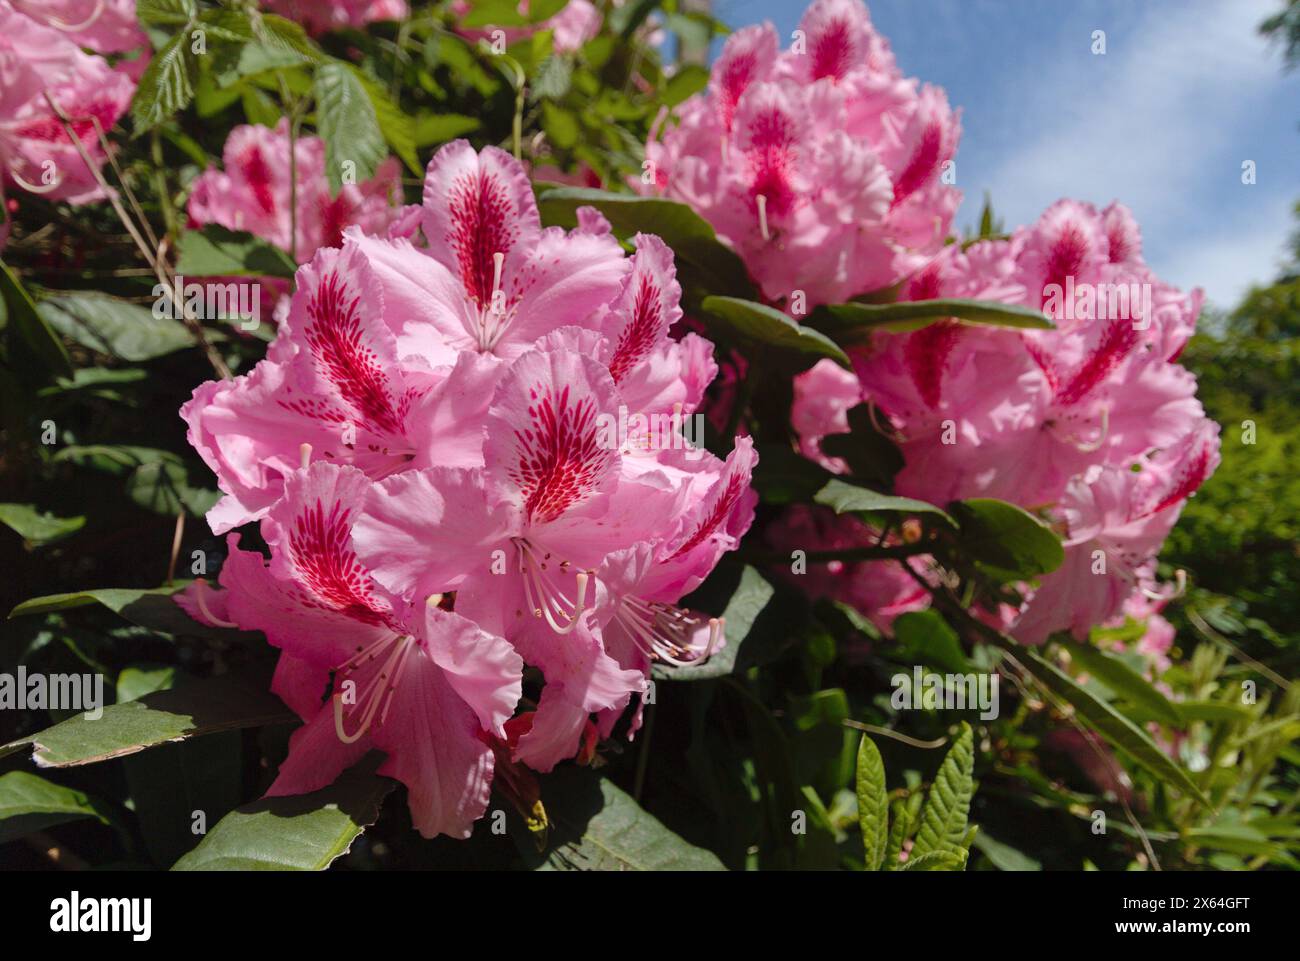 Vibrant Rhododendron blooms seen near Hare Hill, Cheshire Stock Photo